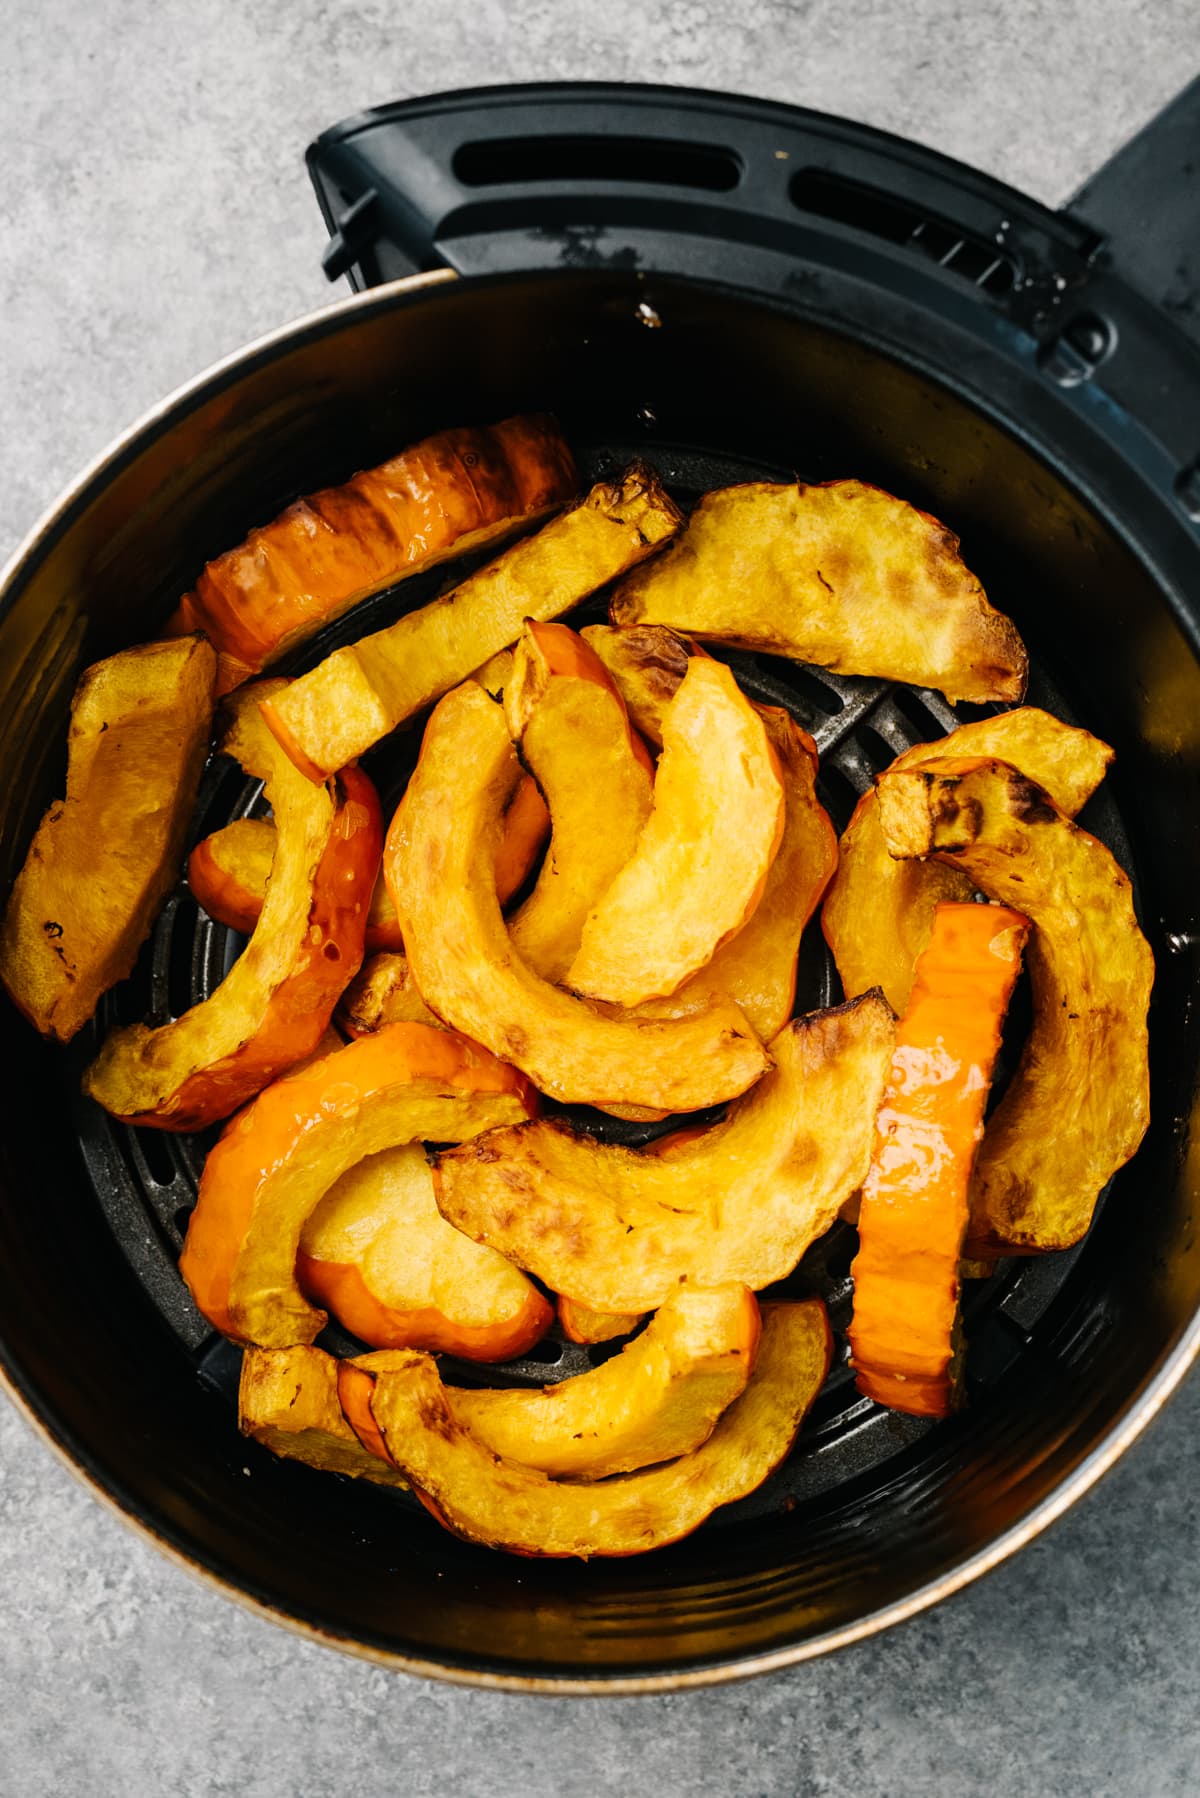 Roasted acorn squash slices in the basket of an air fryer.